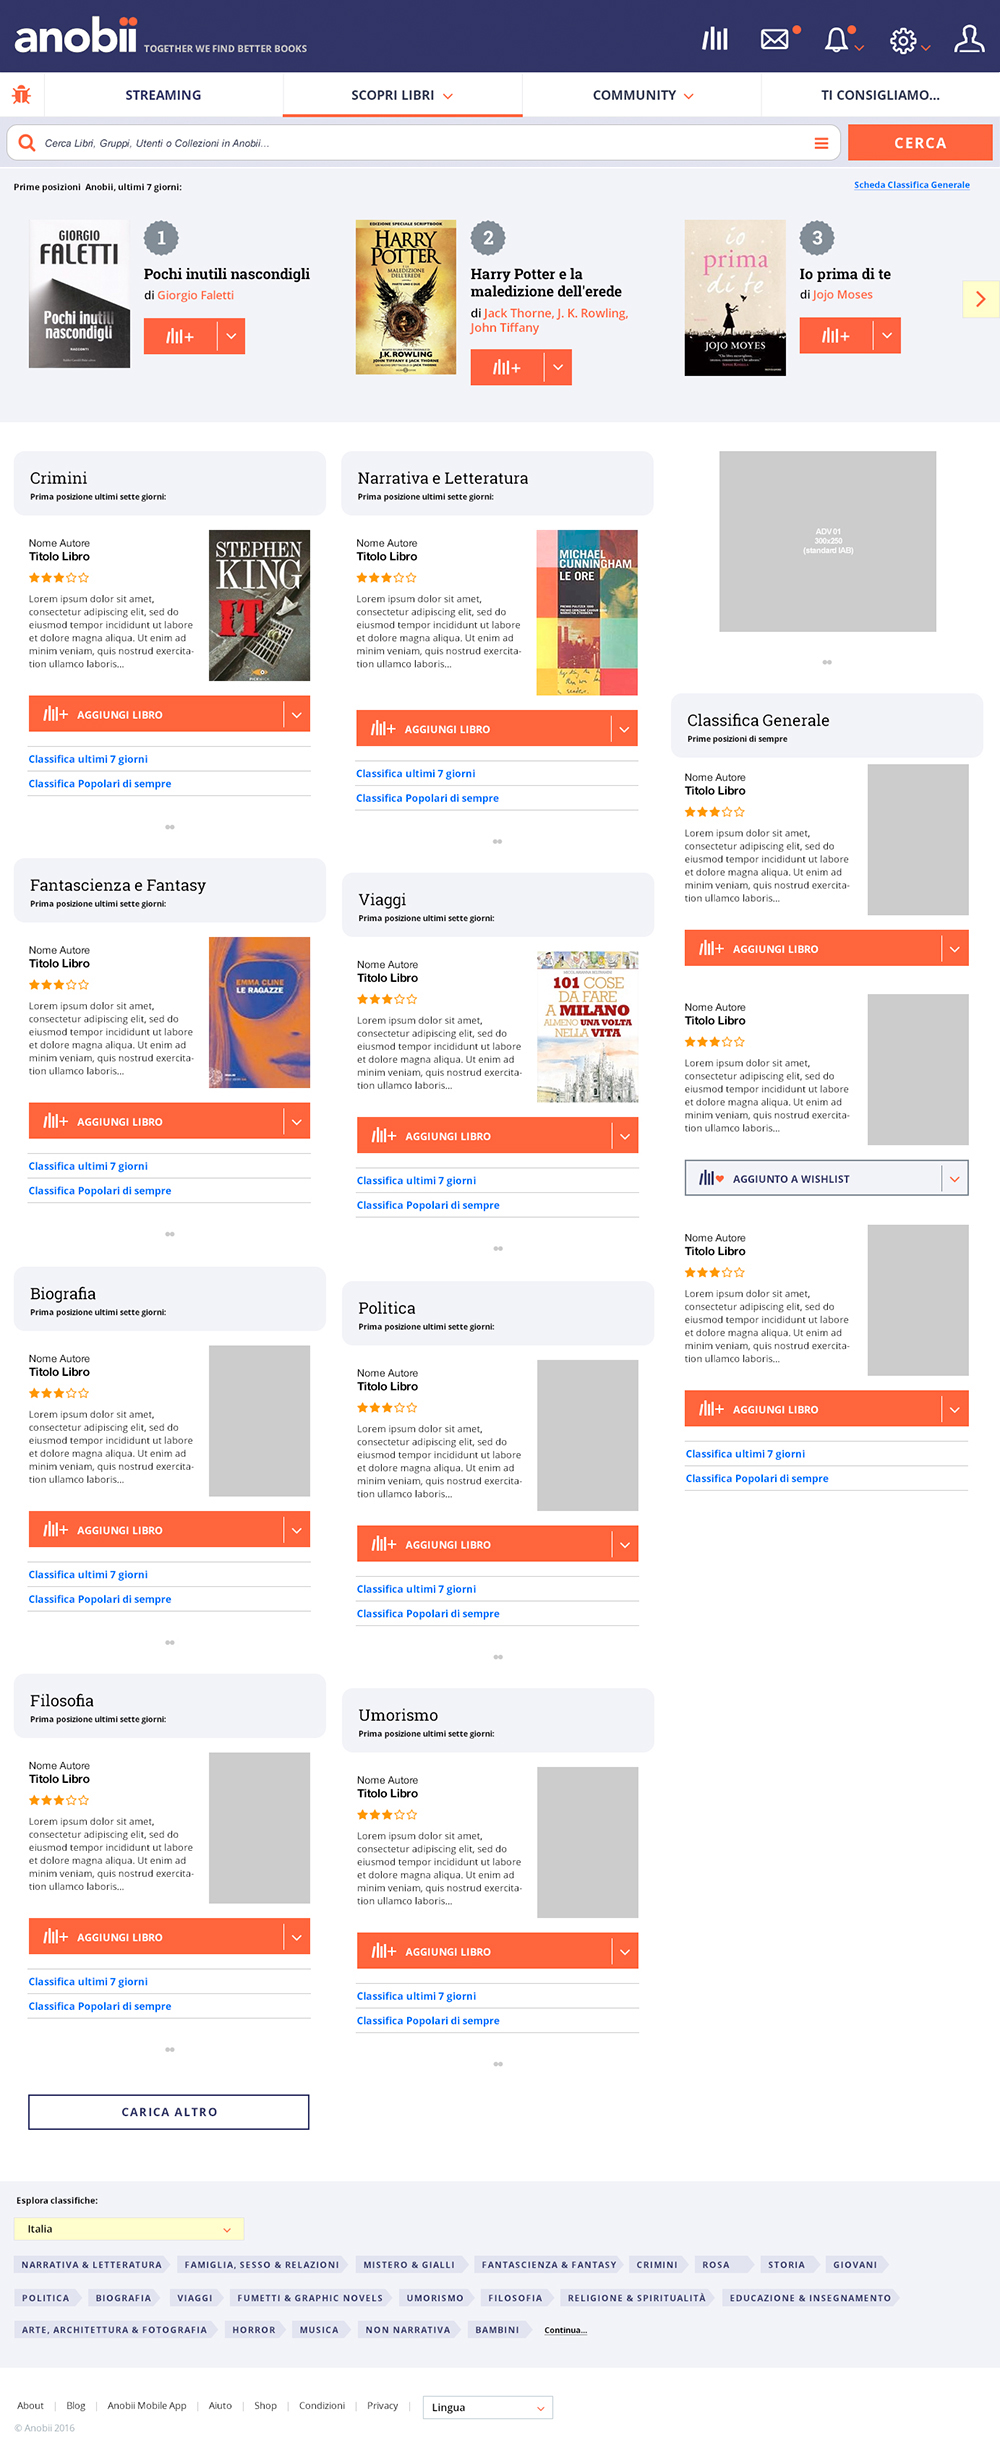 anobii social network redesign books library UGC